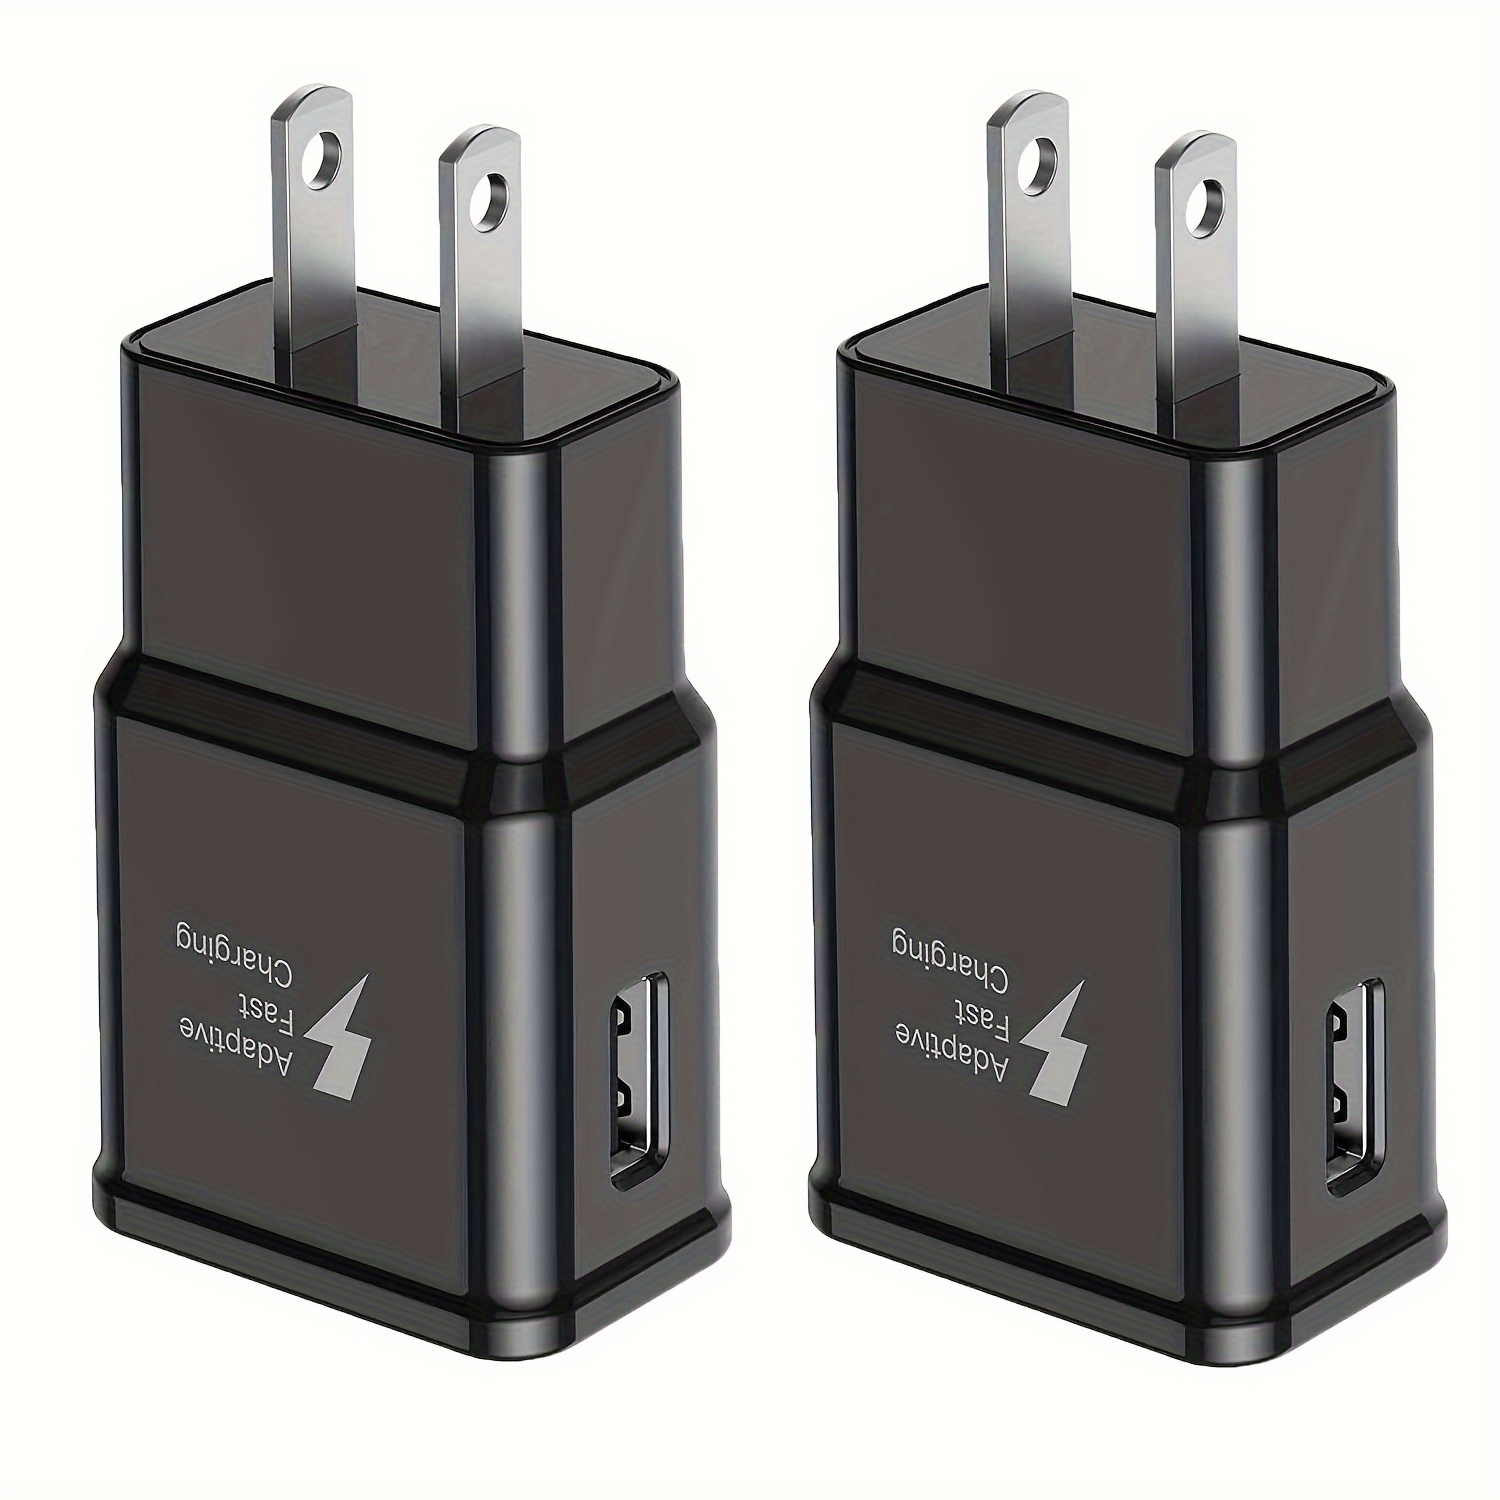 

2pcs Adaptive Usb Wall Charger Adapters For Samsung Galaxy S22 S21 S20 S10 S6 S7 S8 S9/ Edge/plus/active, Note 5 8, Note 9, Note 10, Note 20, Z Fold 4/ Android Phone